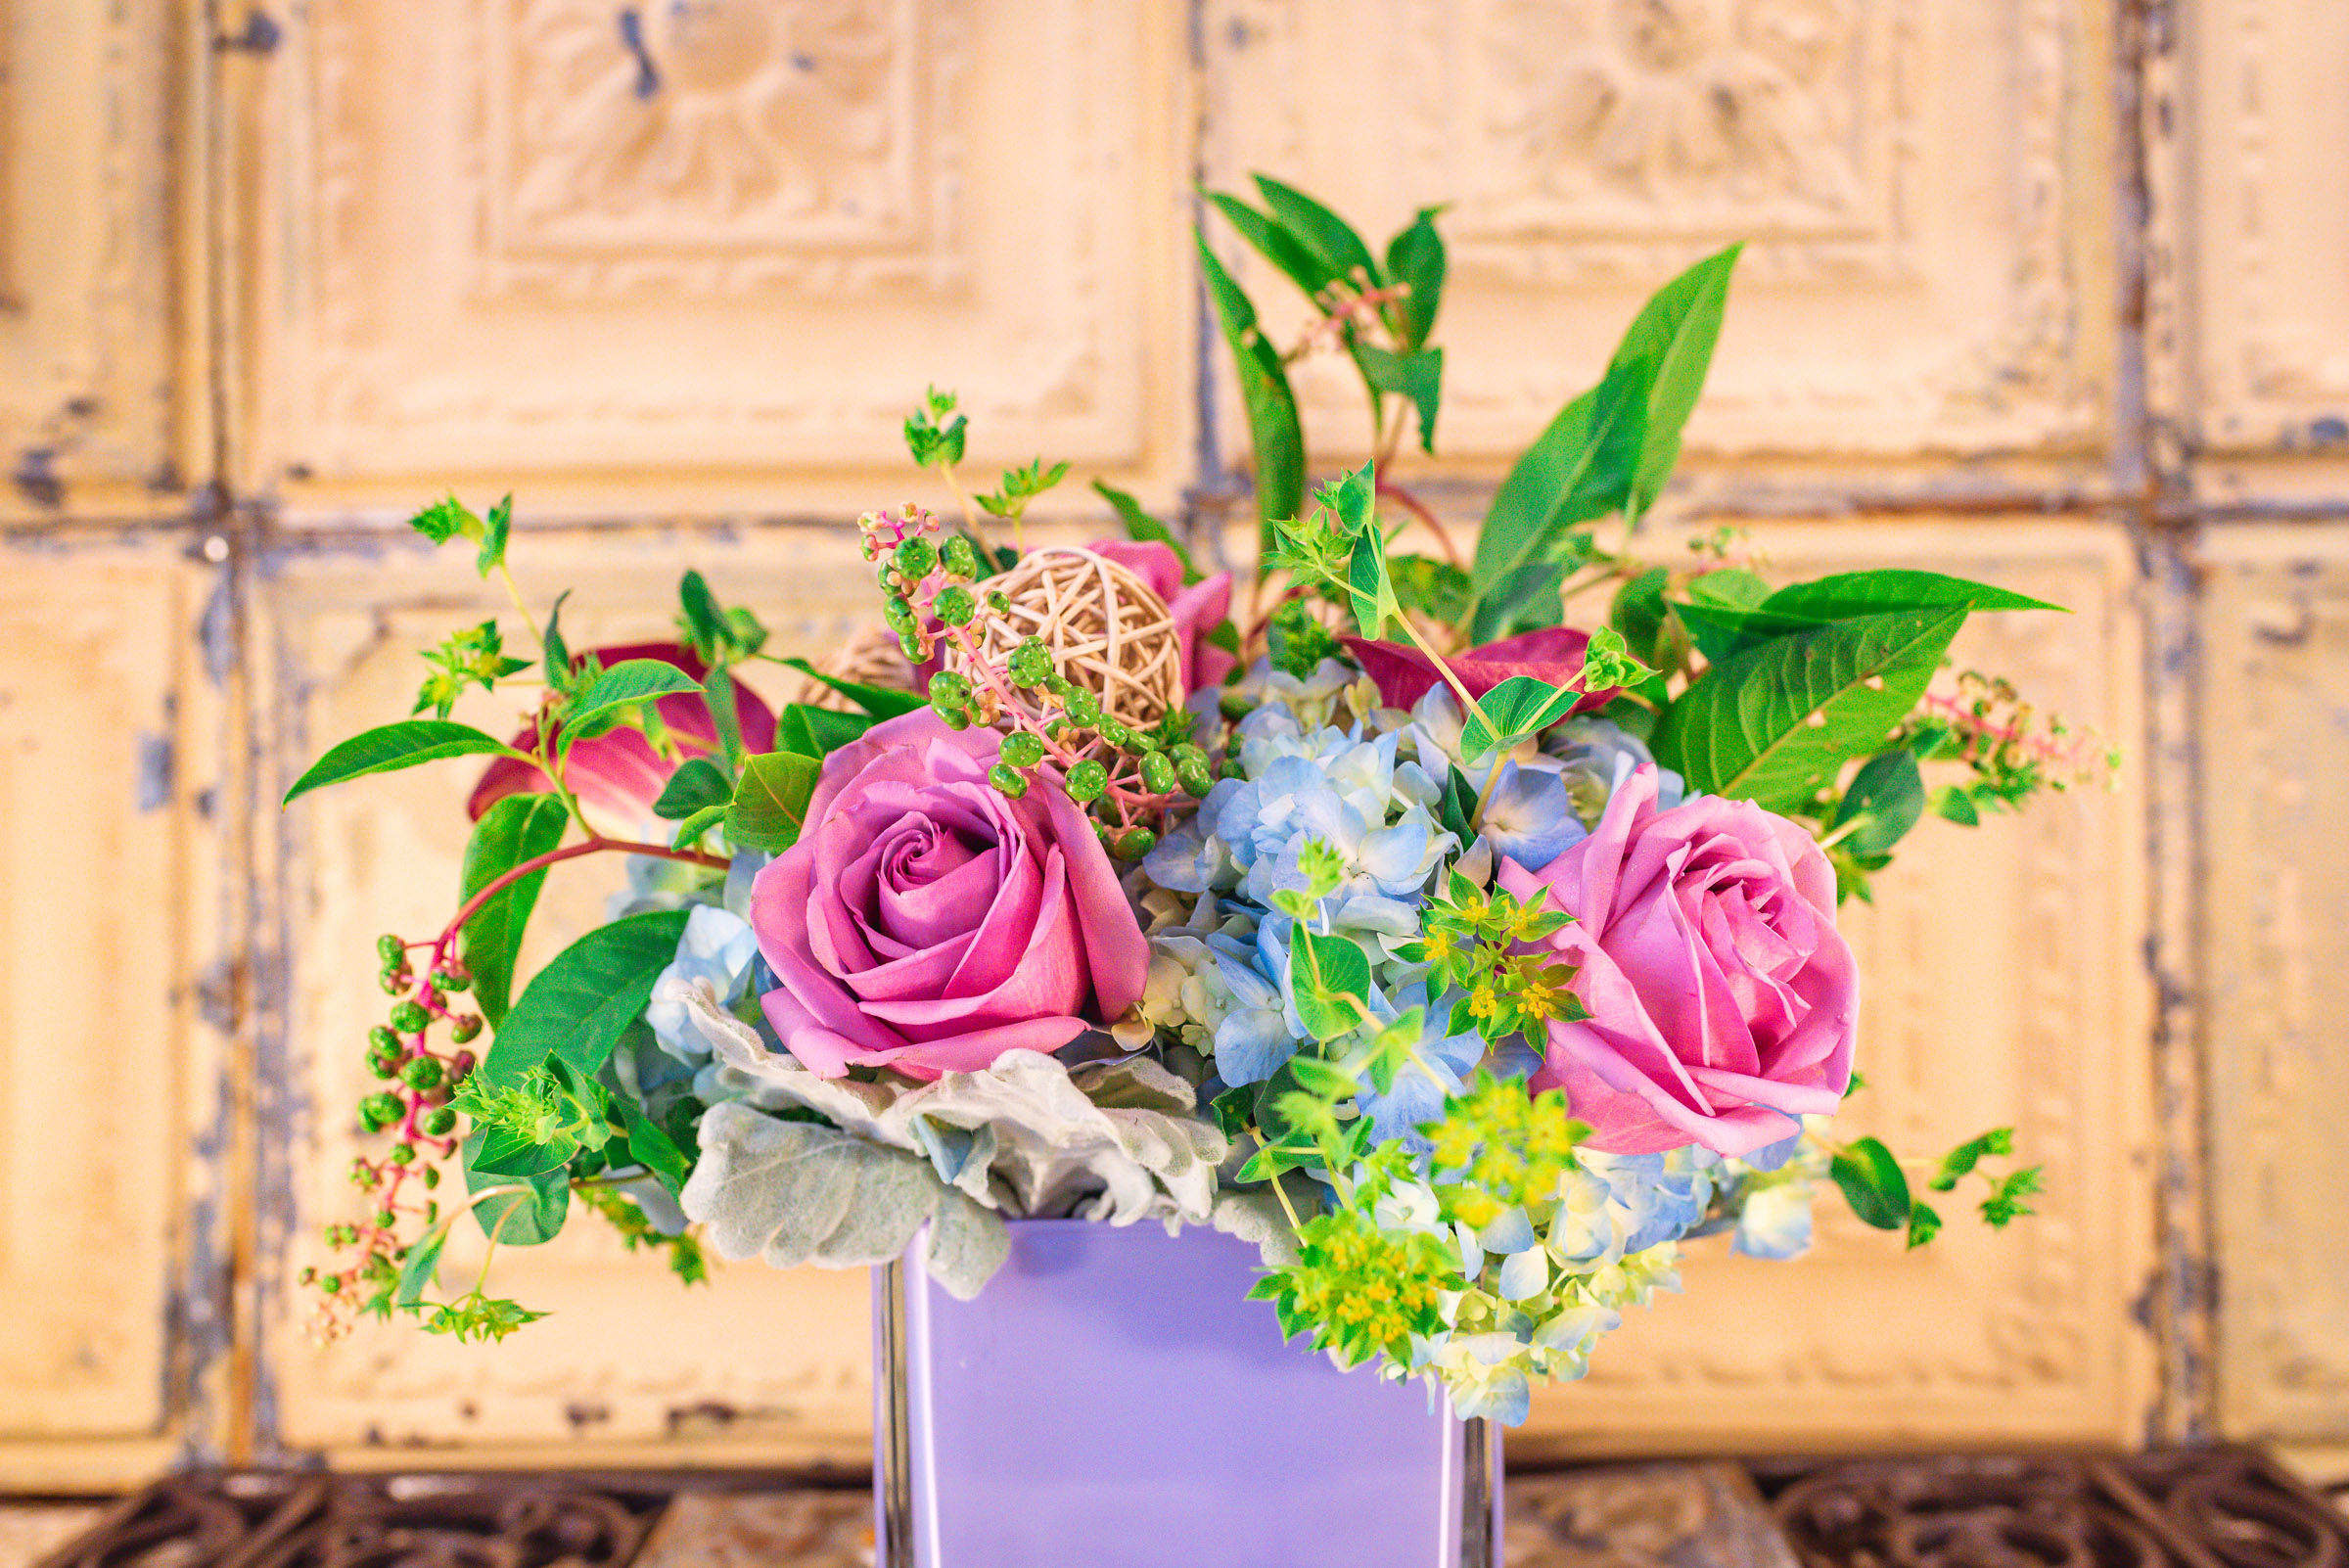 Gloria Estefan - We love blue and pink together, especially in this arrangement of roses, hydrangeas, dusty miller, pokeberries, and foliage.